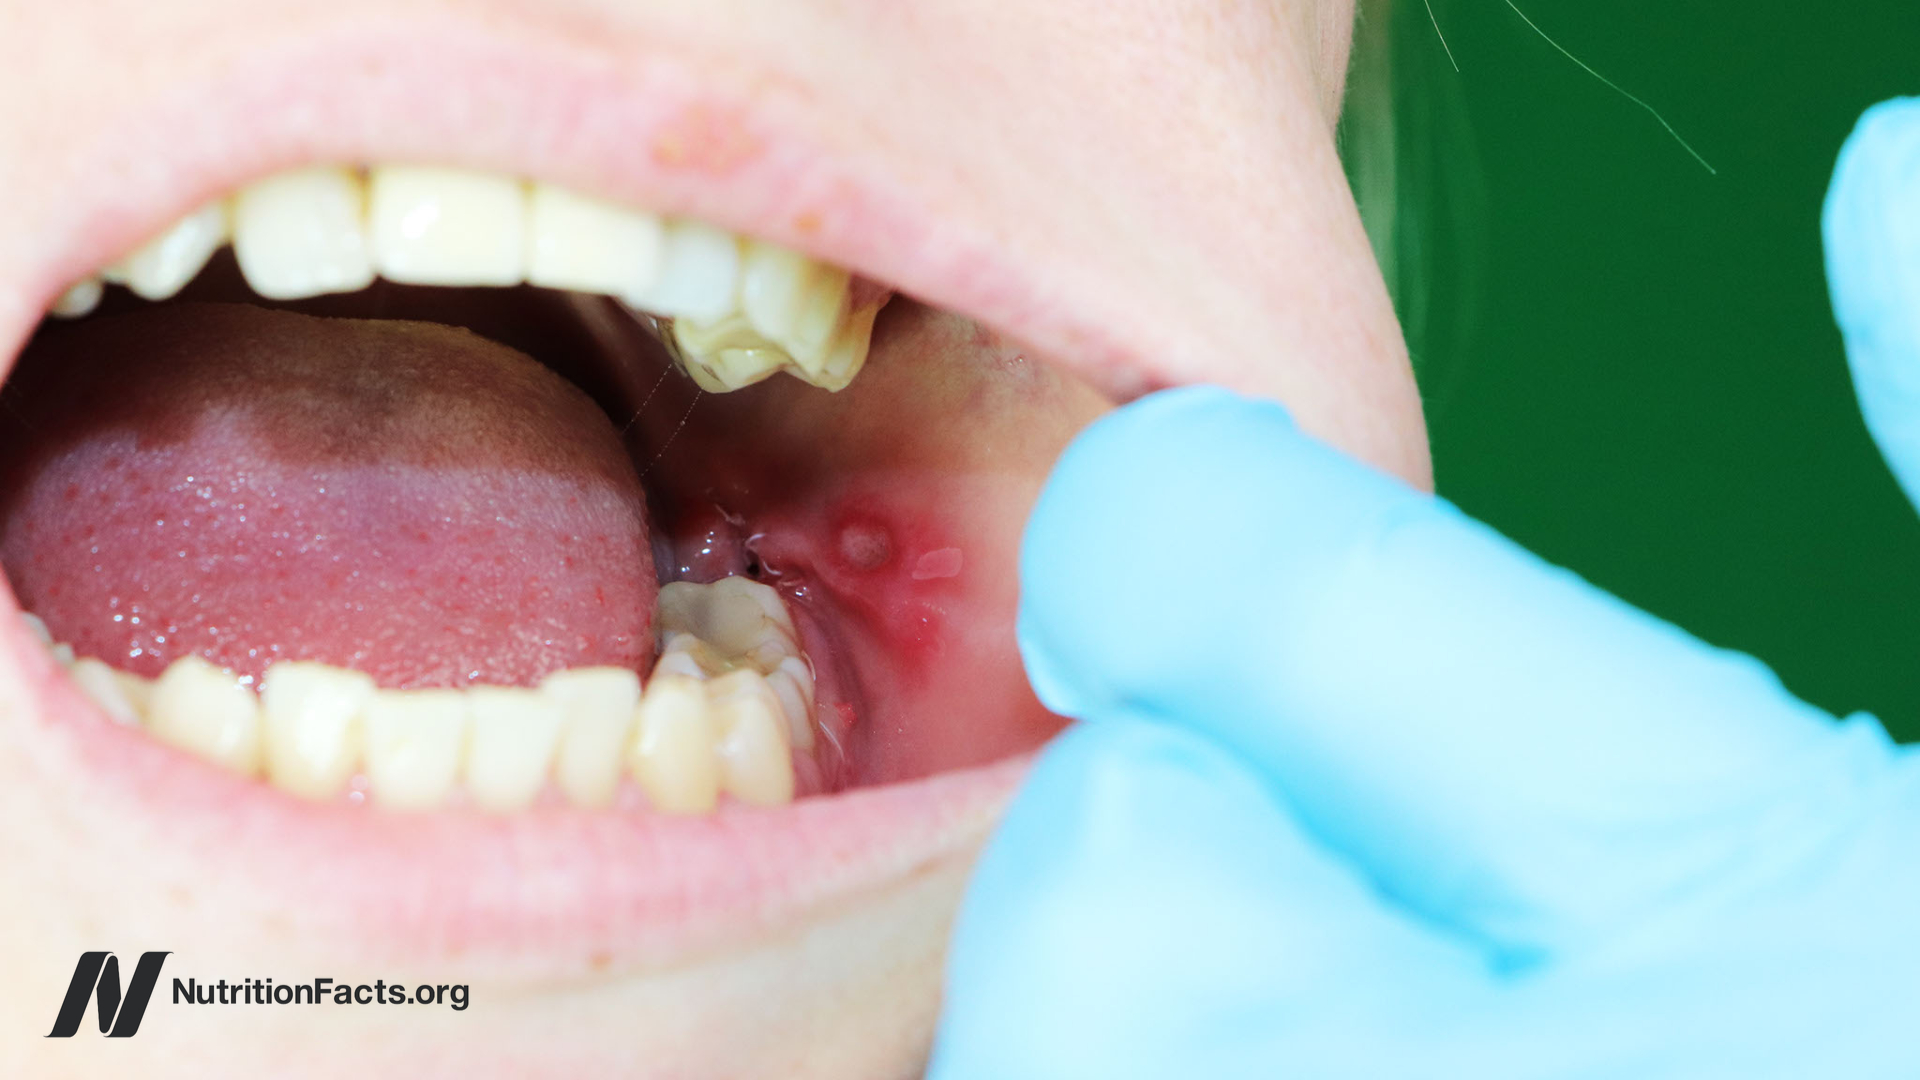 What Causes Canker Sores And How To Get Rid Of Them